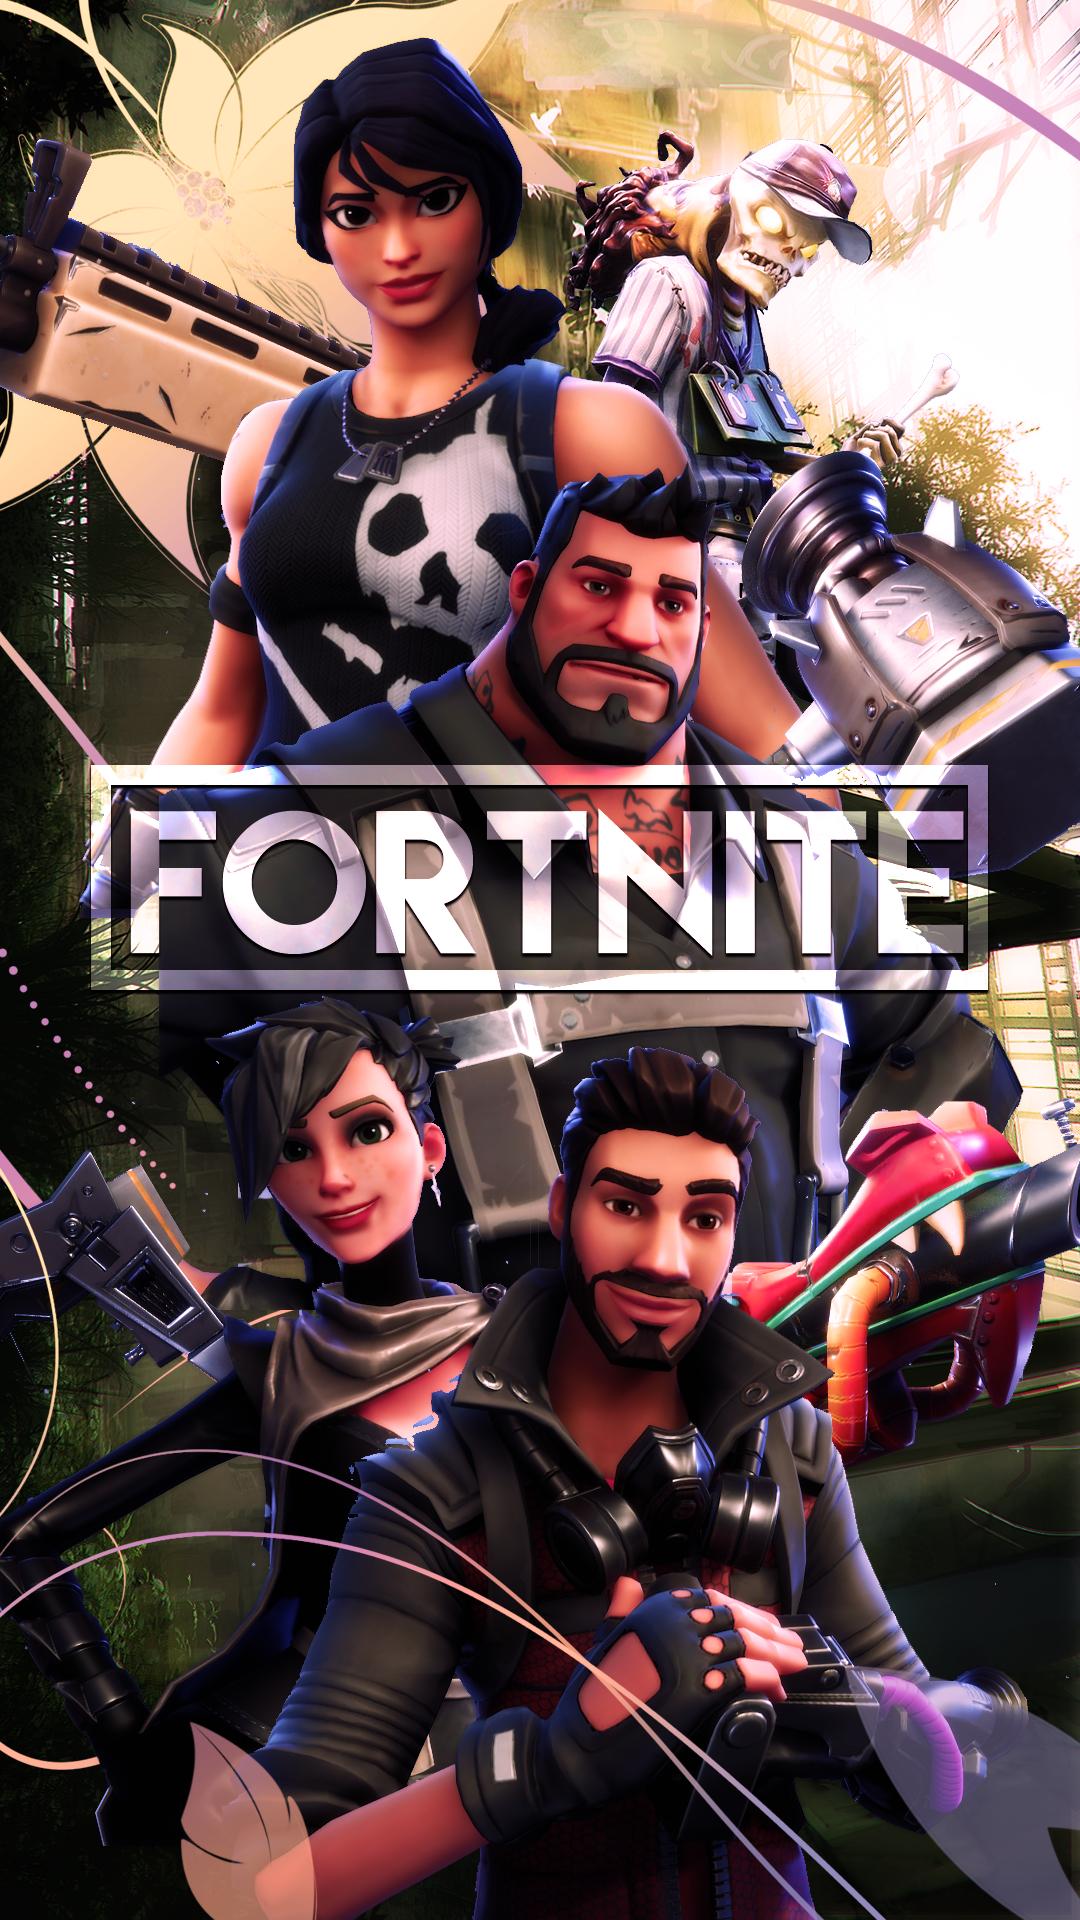 Fortnite squad 4k wallpaper for iPhone and Android